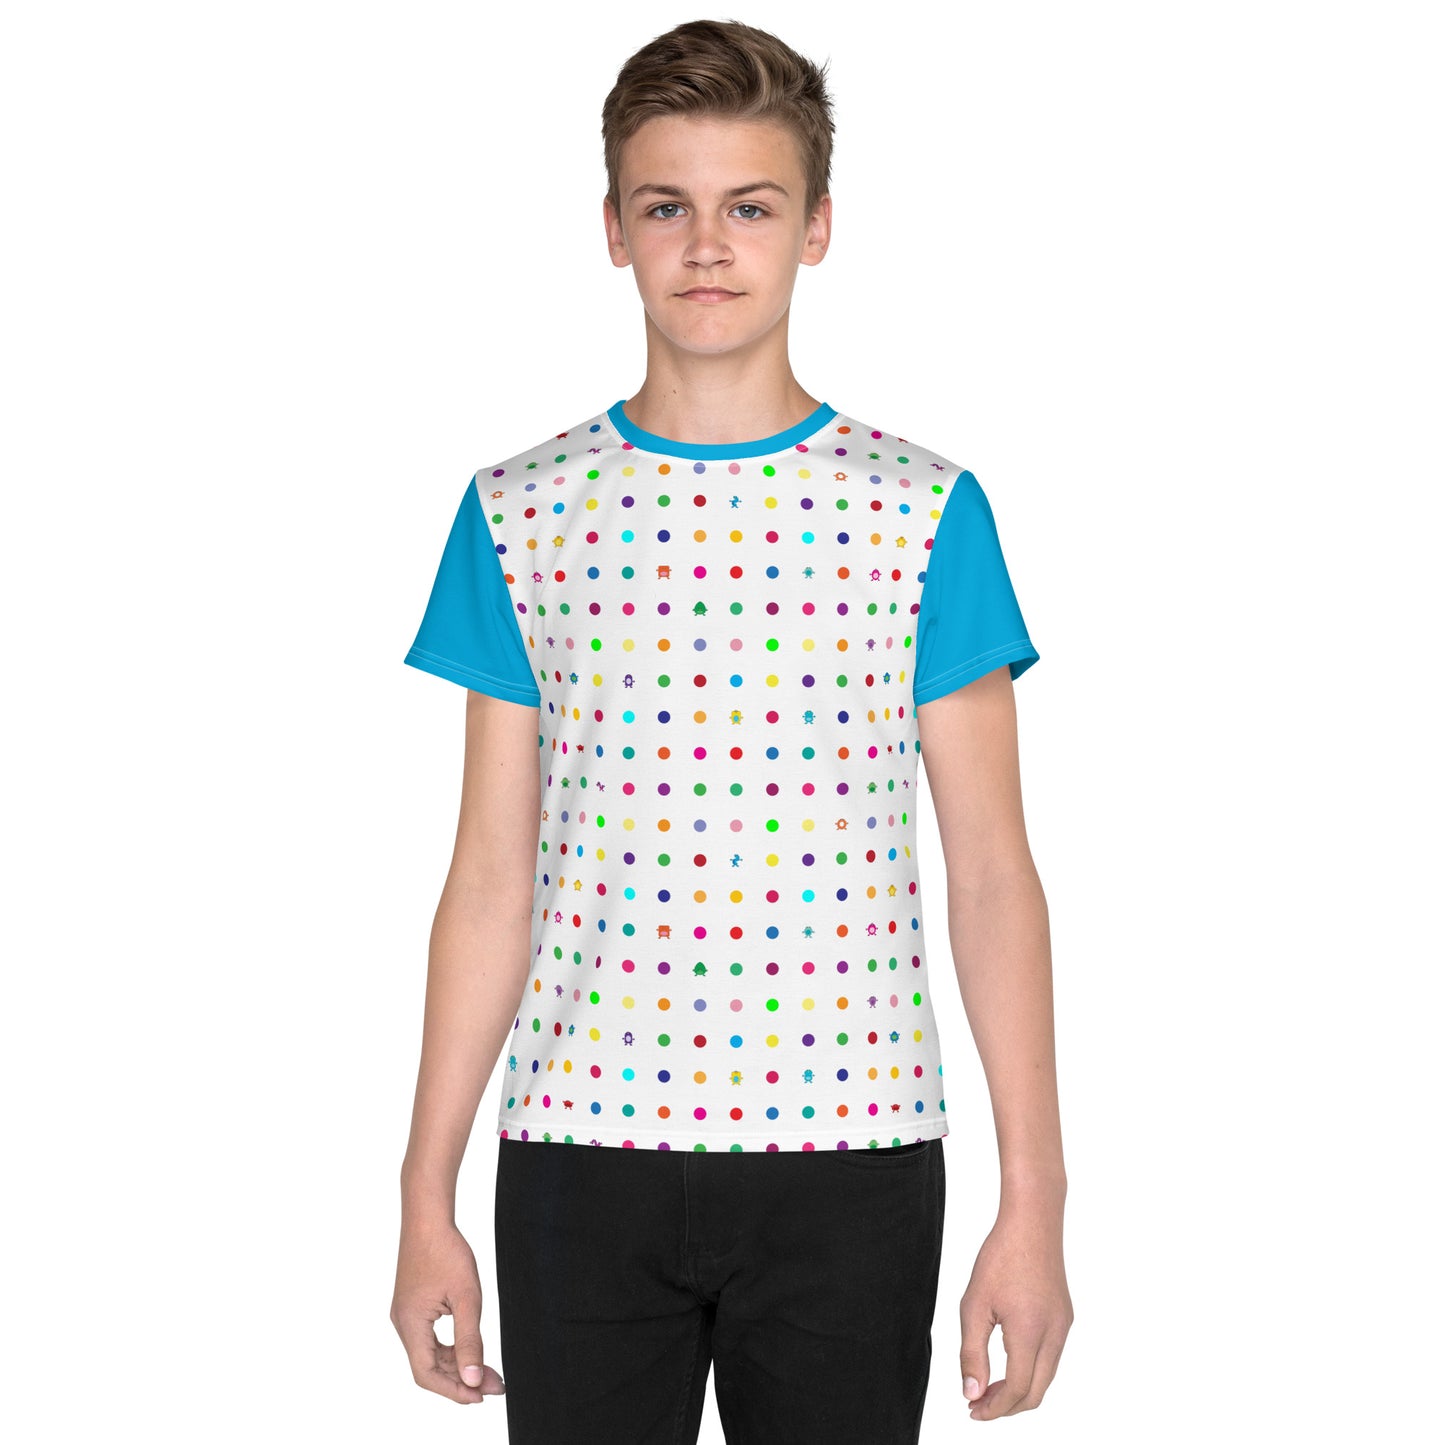 Youth t-shirt Small dots turquoise sleeves crew neck